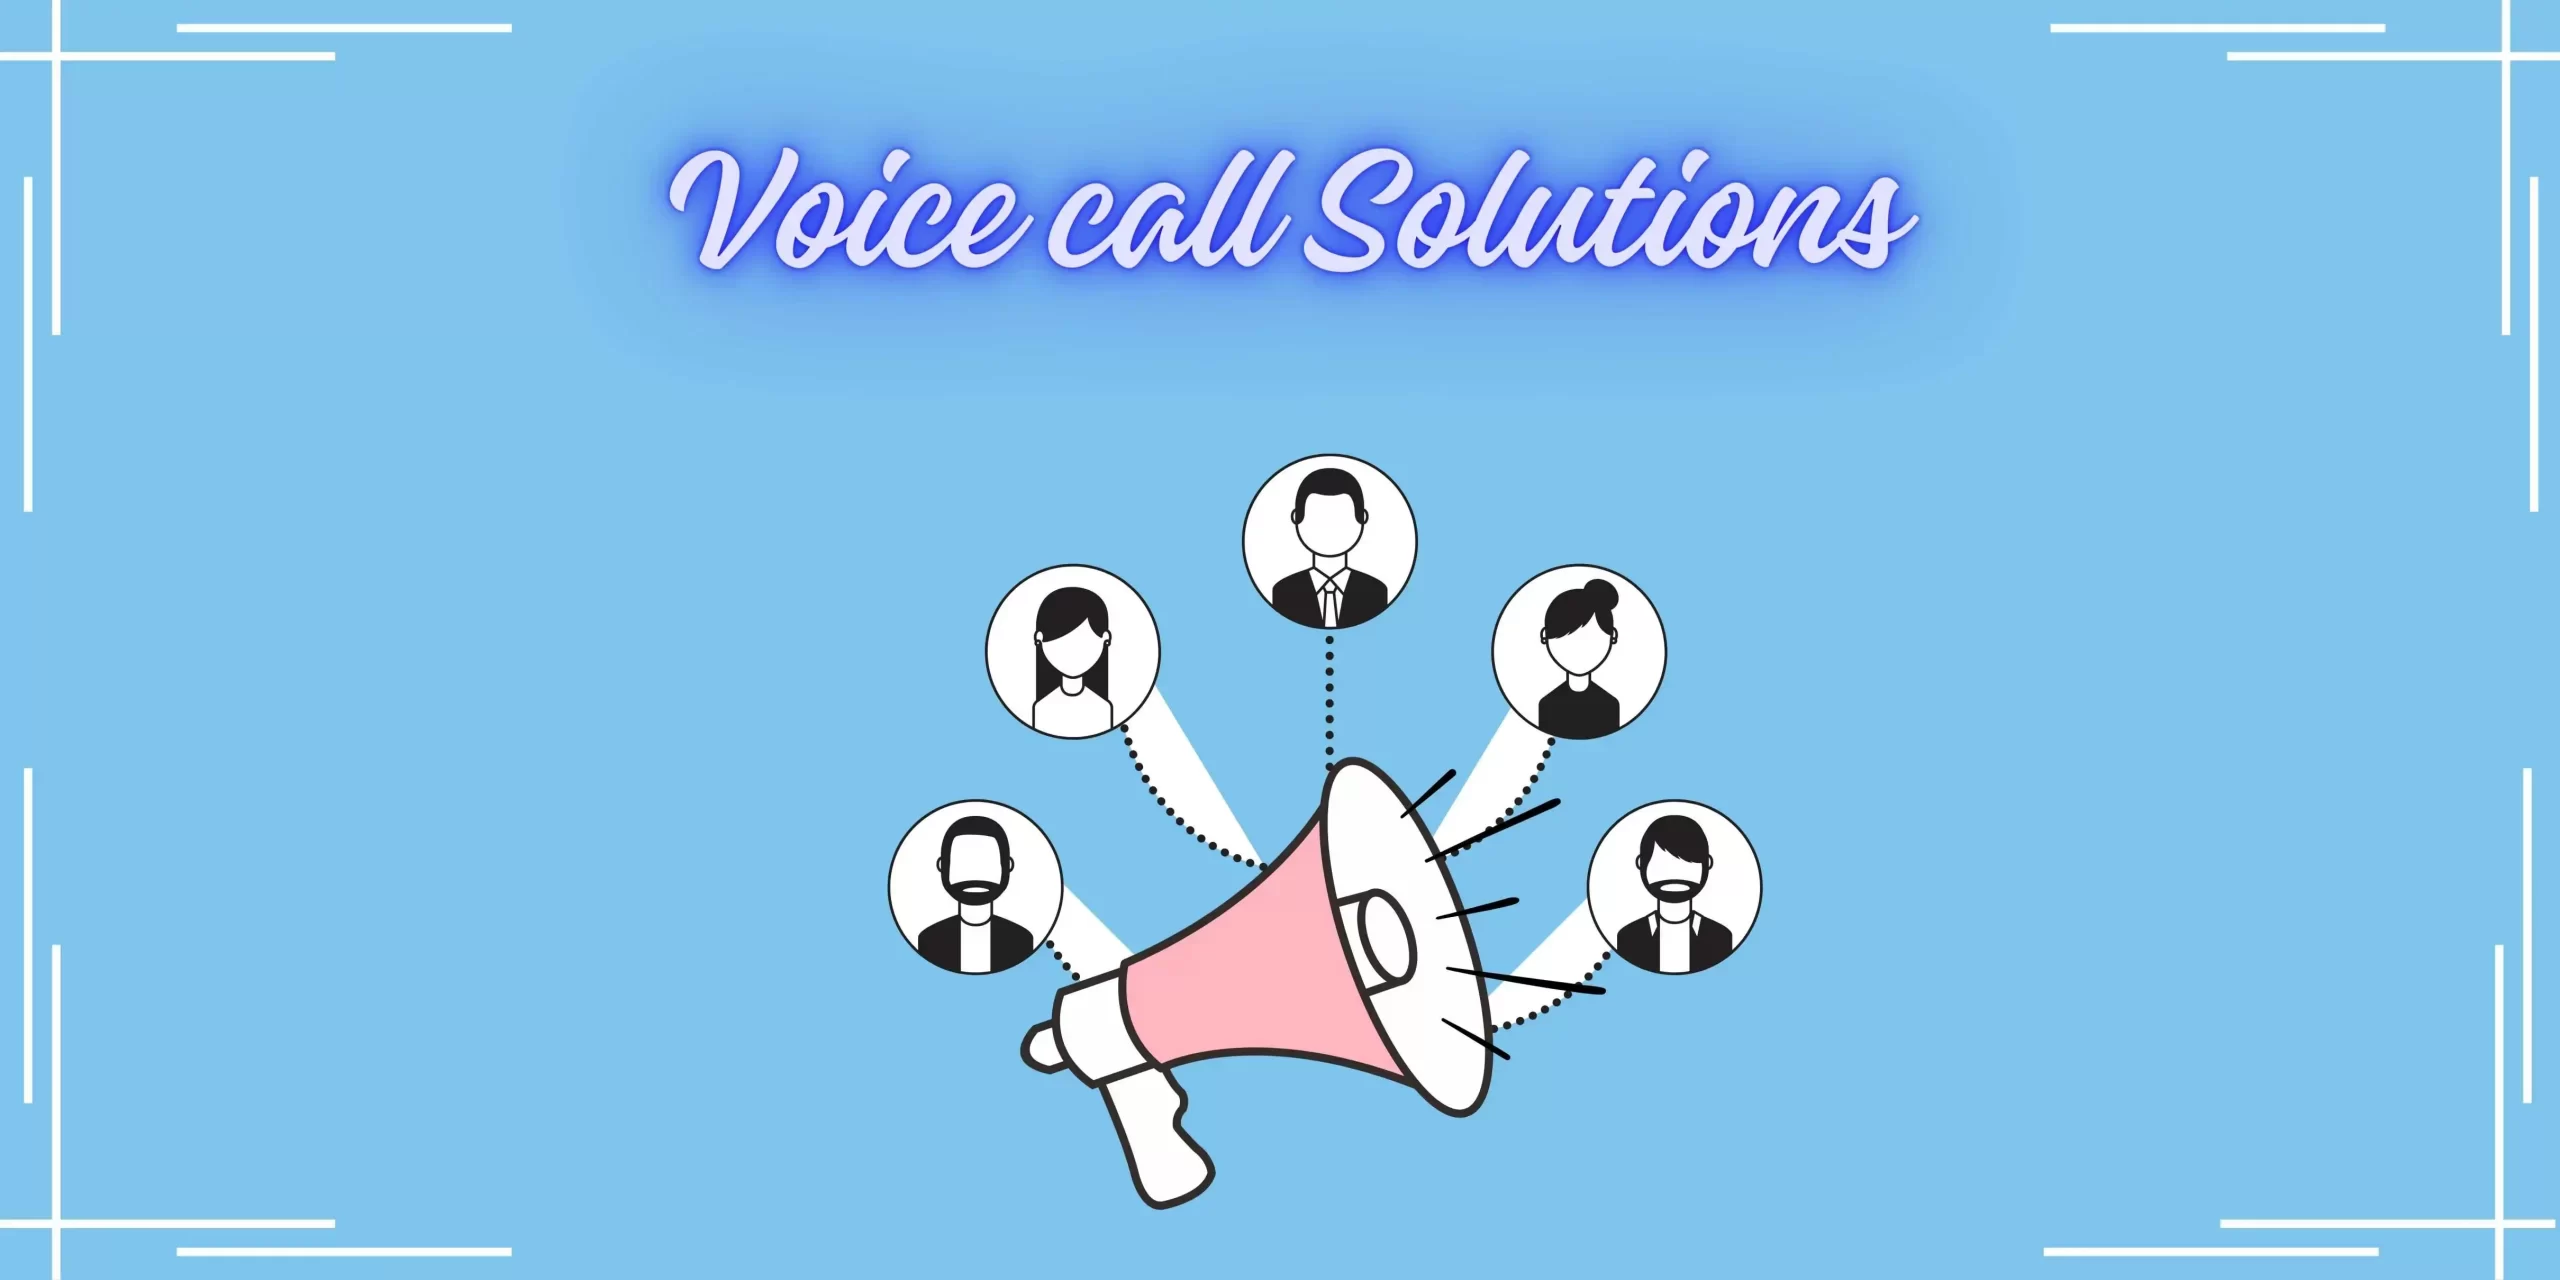 voice call solutions